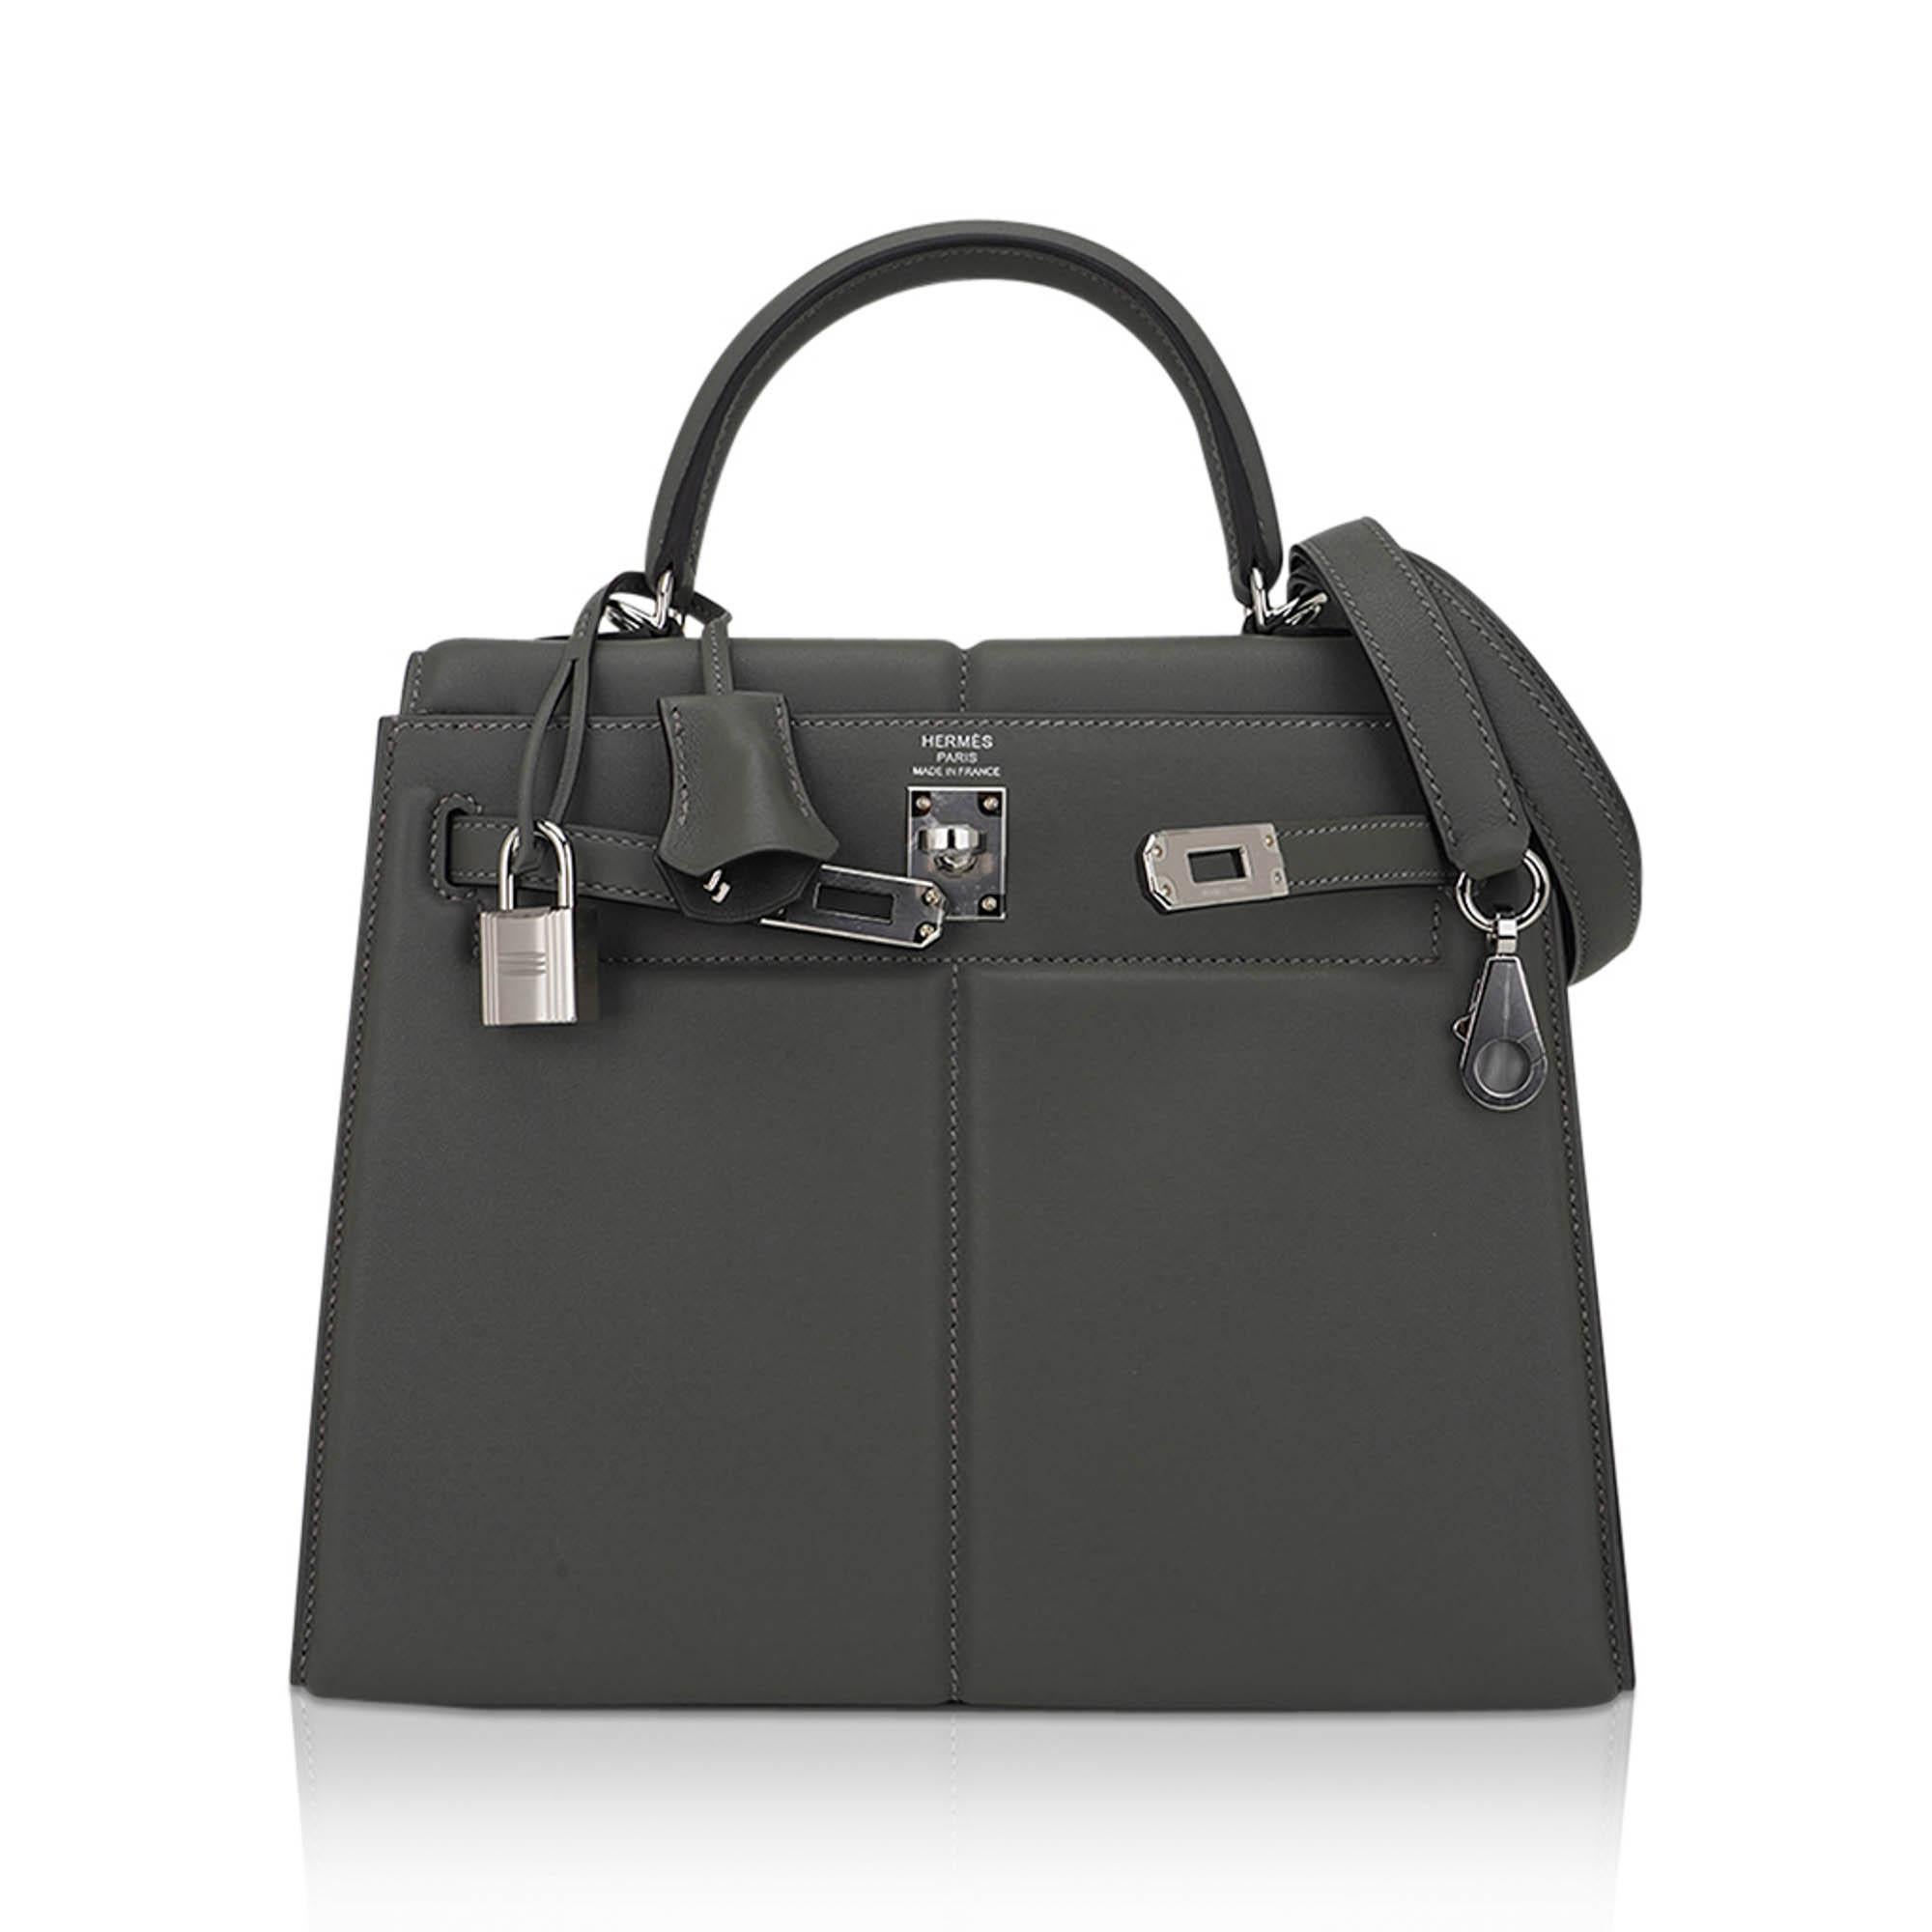 Hermes Padded Kelly 25 Limited Edition Bag Gris Meyer Palladium Hardware Swift In New Condition For Sale In Miami, FL